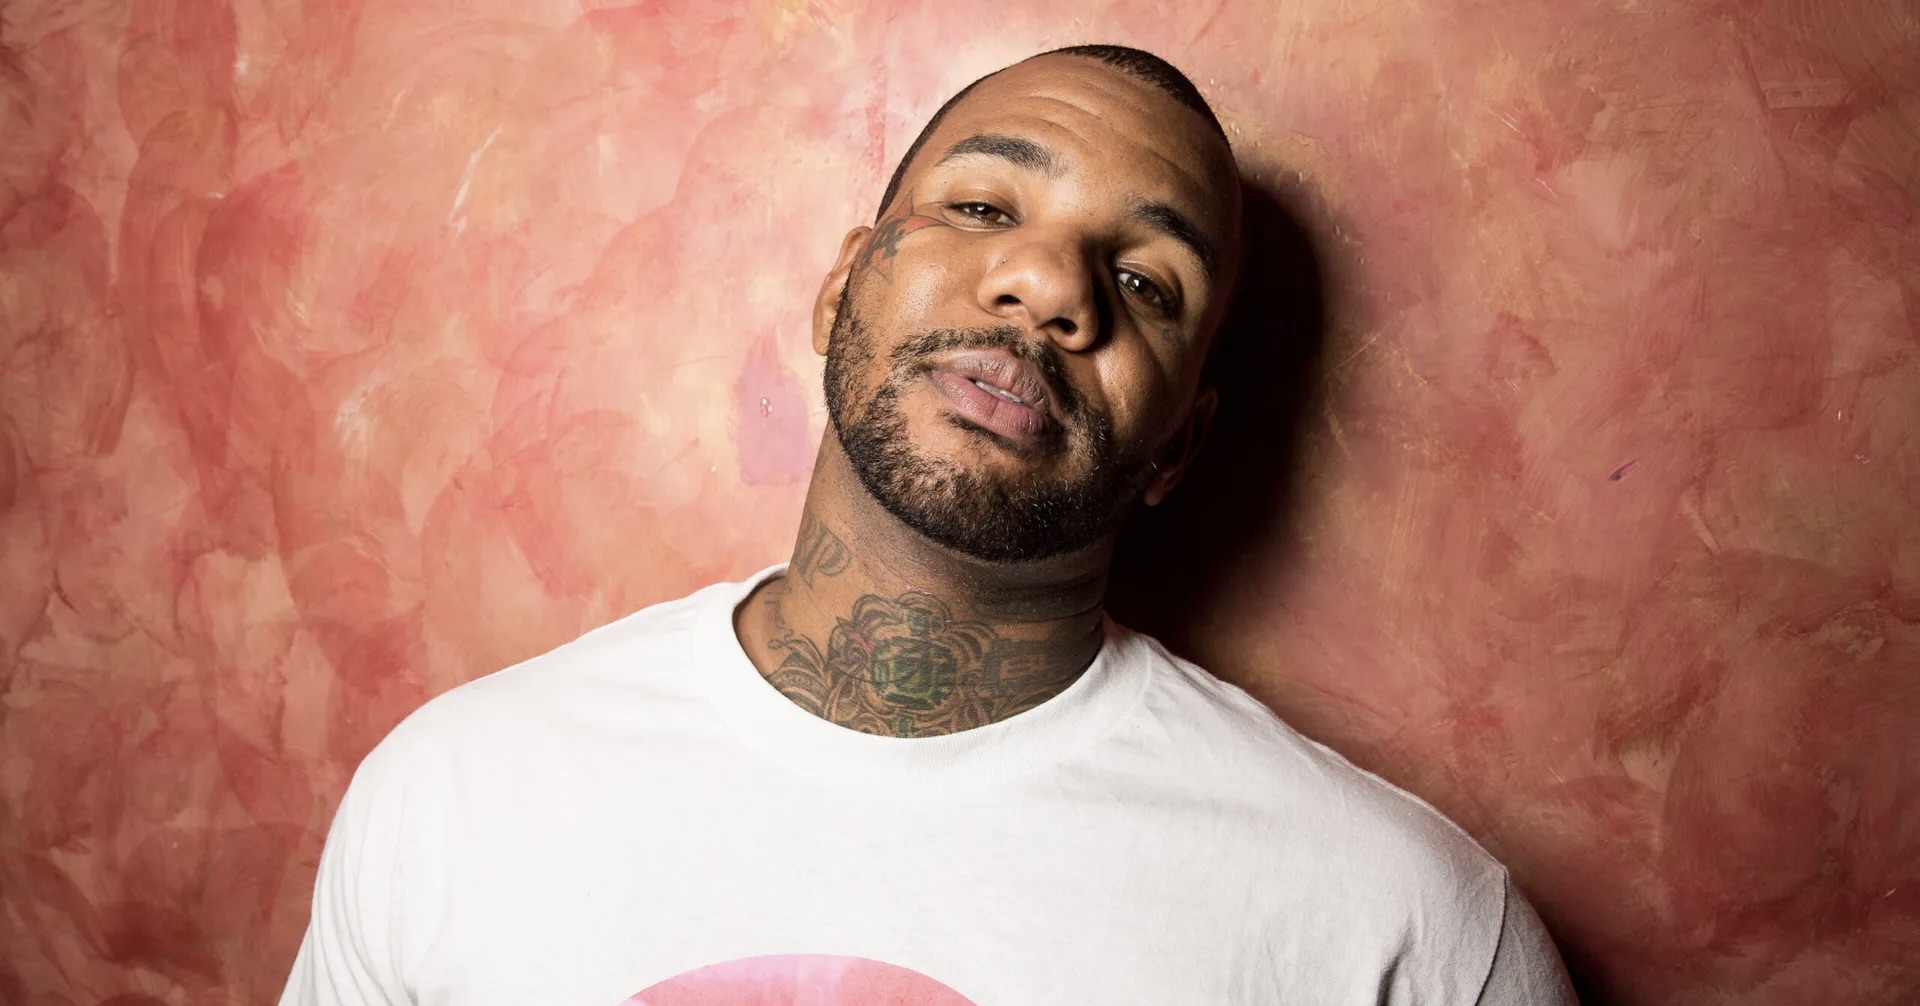 The Game Throws Back Fan’s Bra On Stage: “I Don’t Be Doing No Tricking!” [Video]